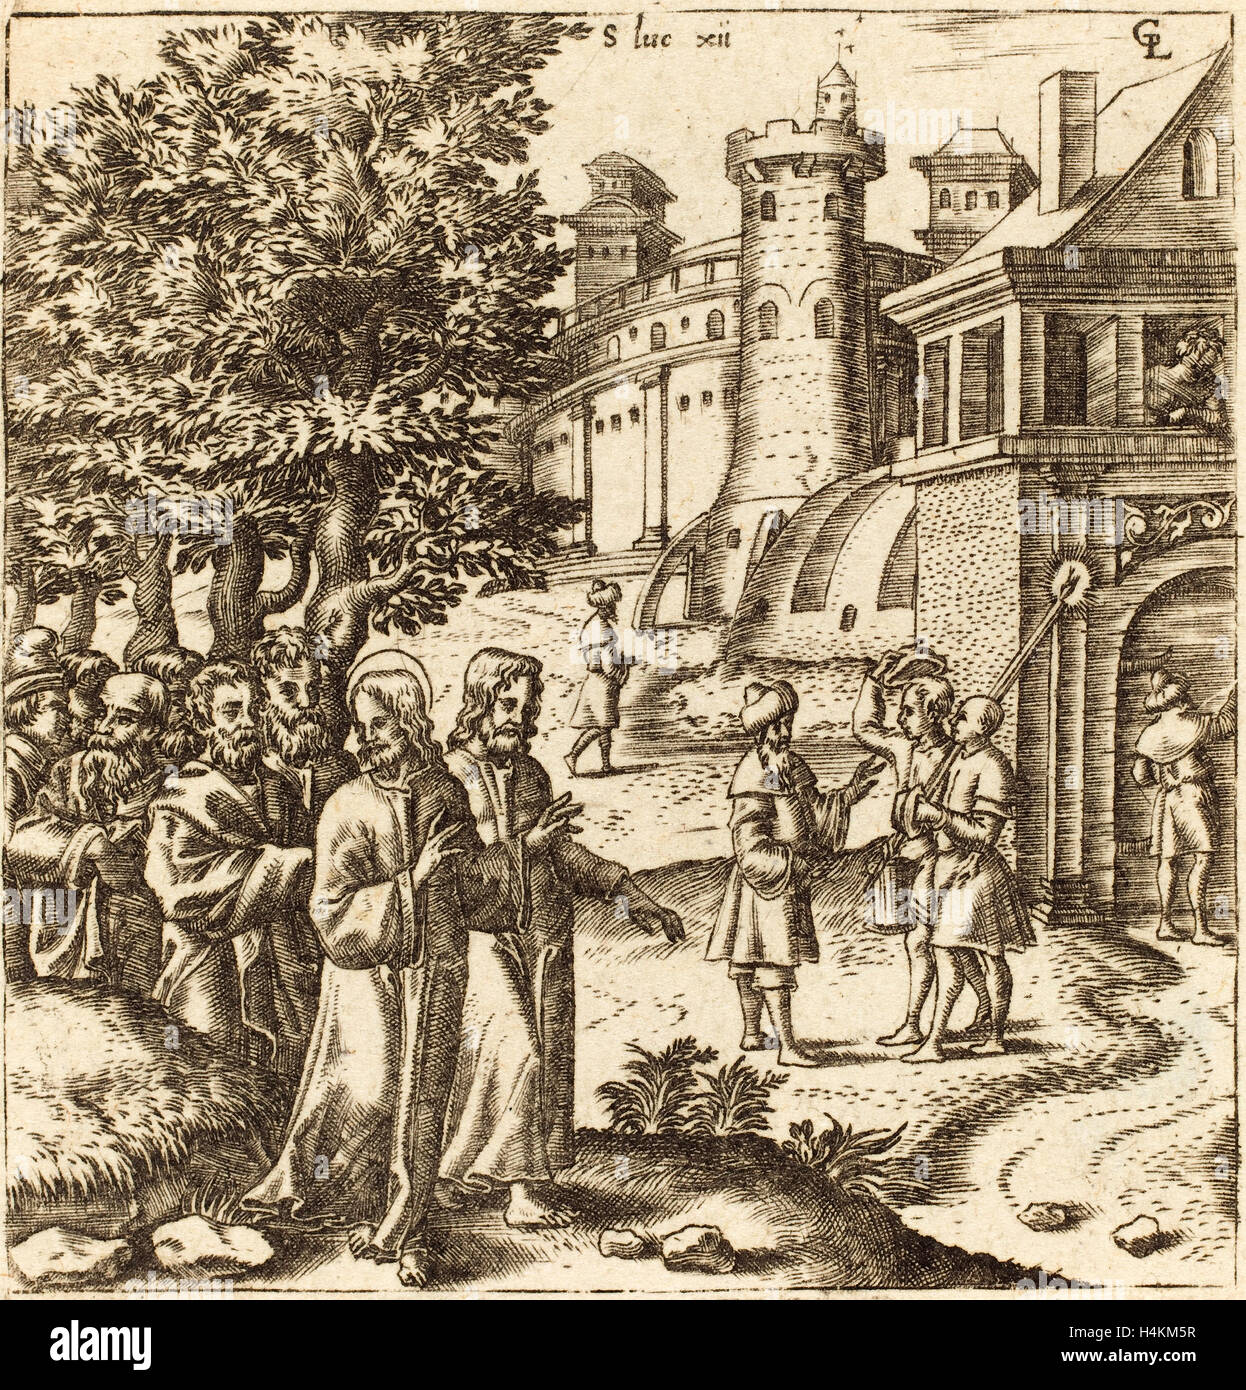 Léonard Gaultier (French, 1561 - 1641), Christ Teaching the Multitude, probably c. 1576-1580, engraving Stock Photo